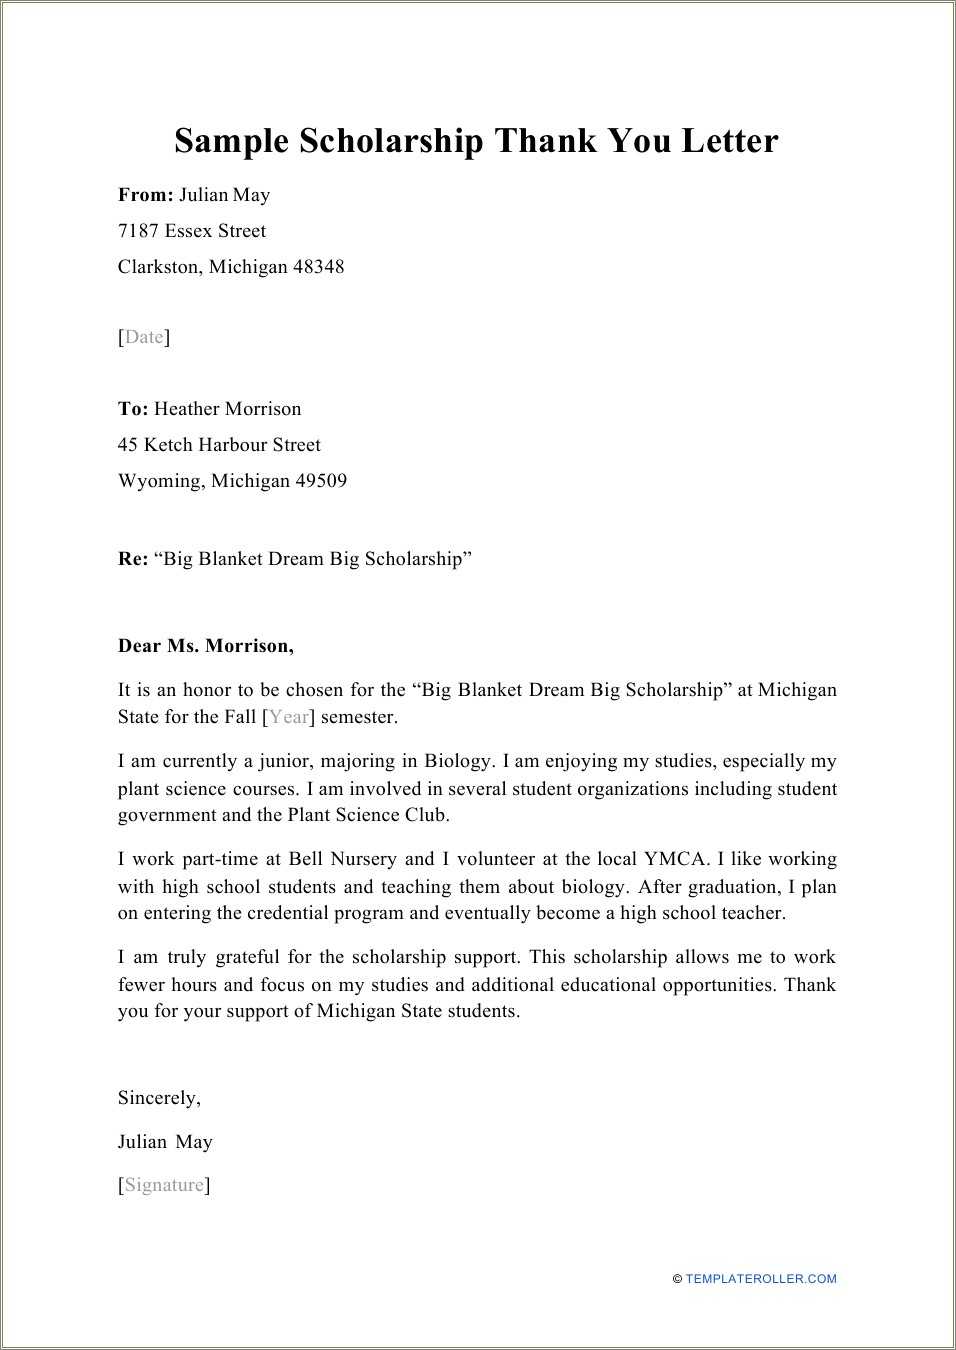 Examples Of Resume Thank You Letters - Resume Example Gallery